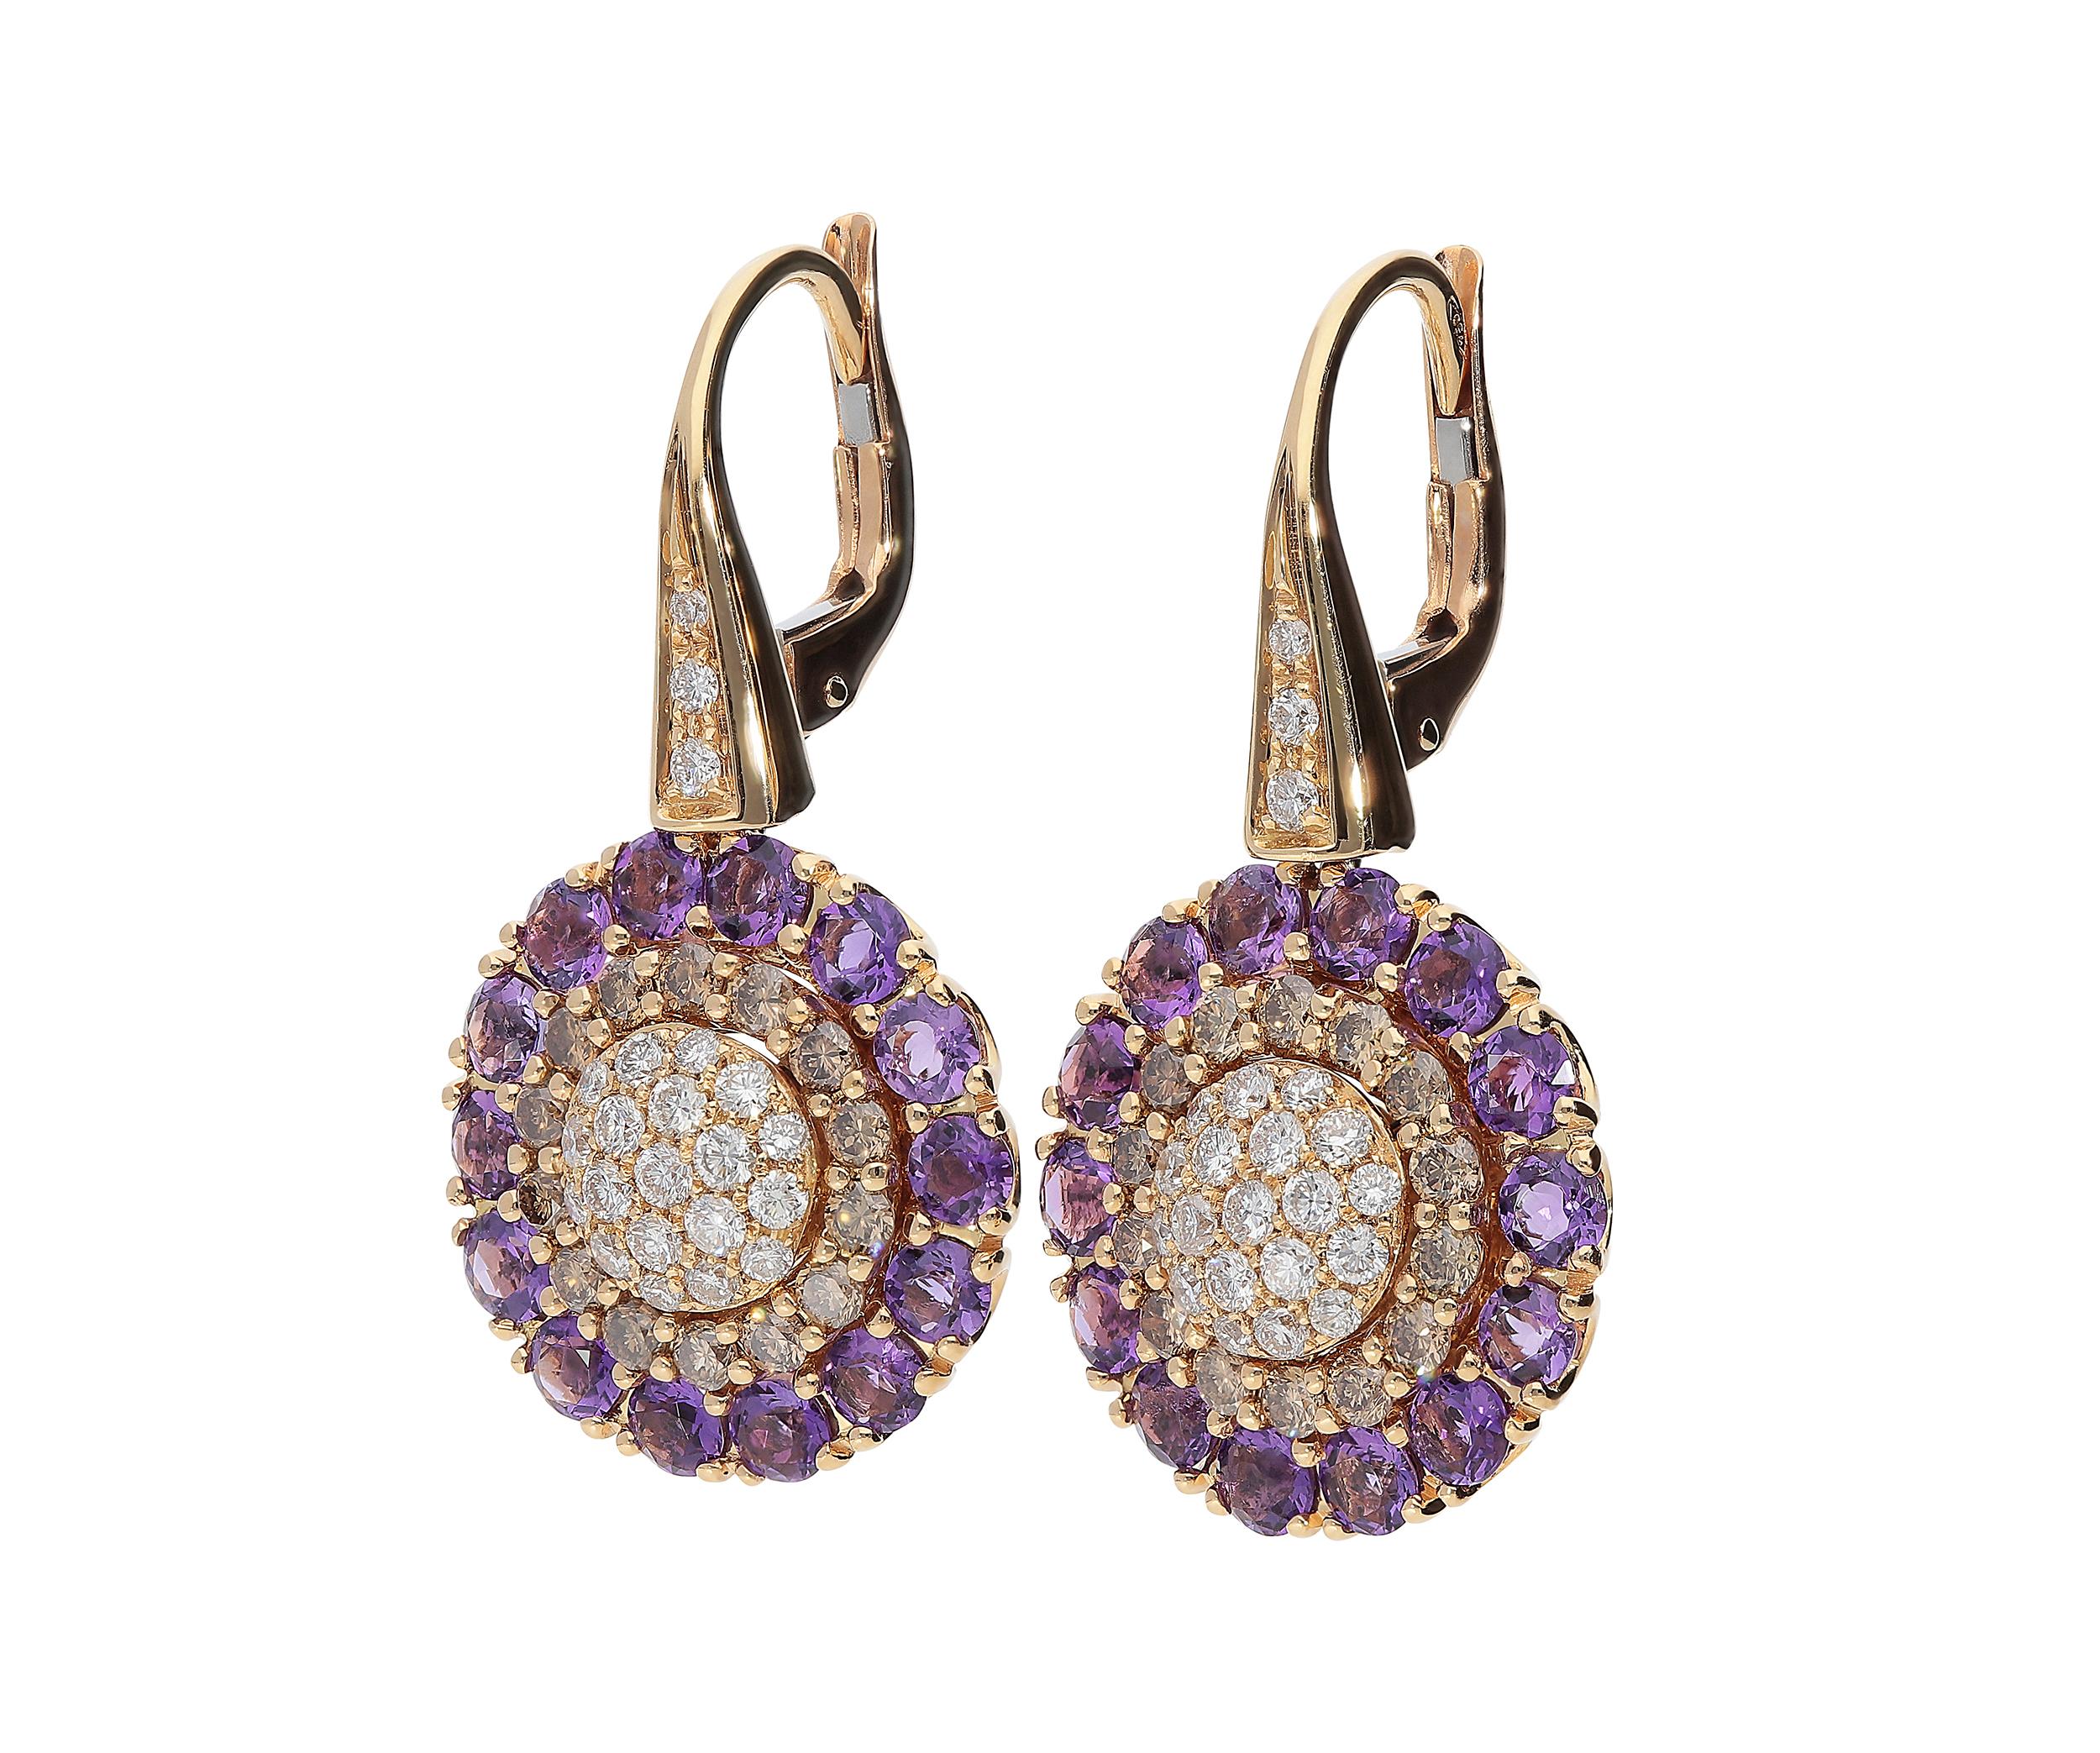 Dangle earrings in 18kt pink gold for 7,00 grams and easy lever-back.
These jewels have got 0,49 carat white round brilliant diamonds color G clarity SI, 0,55 carat brown round brilliant diamonds and 1,48 carats of round brilliant amethyst. The